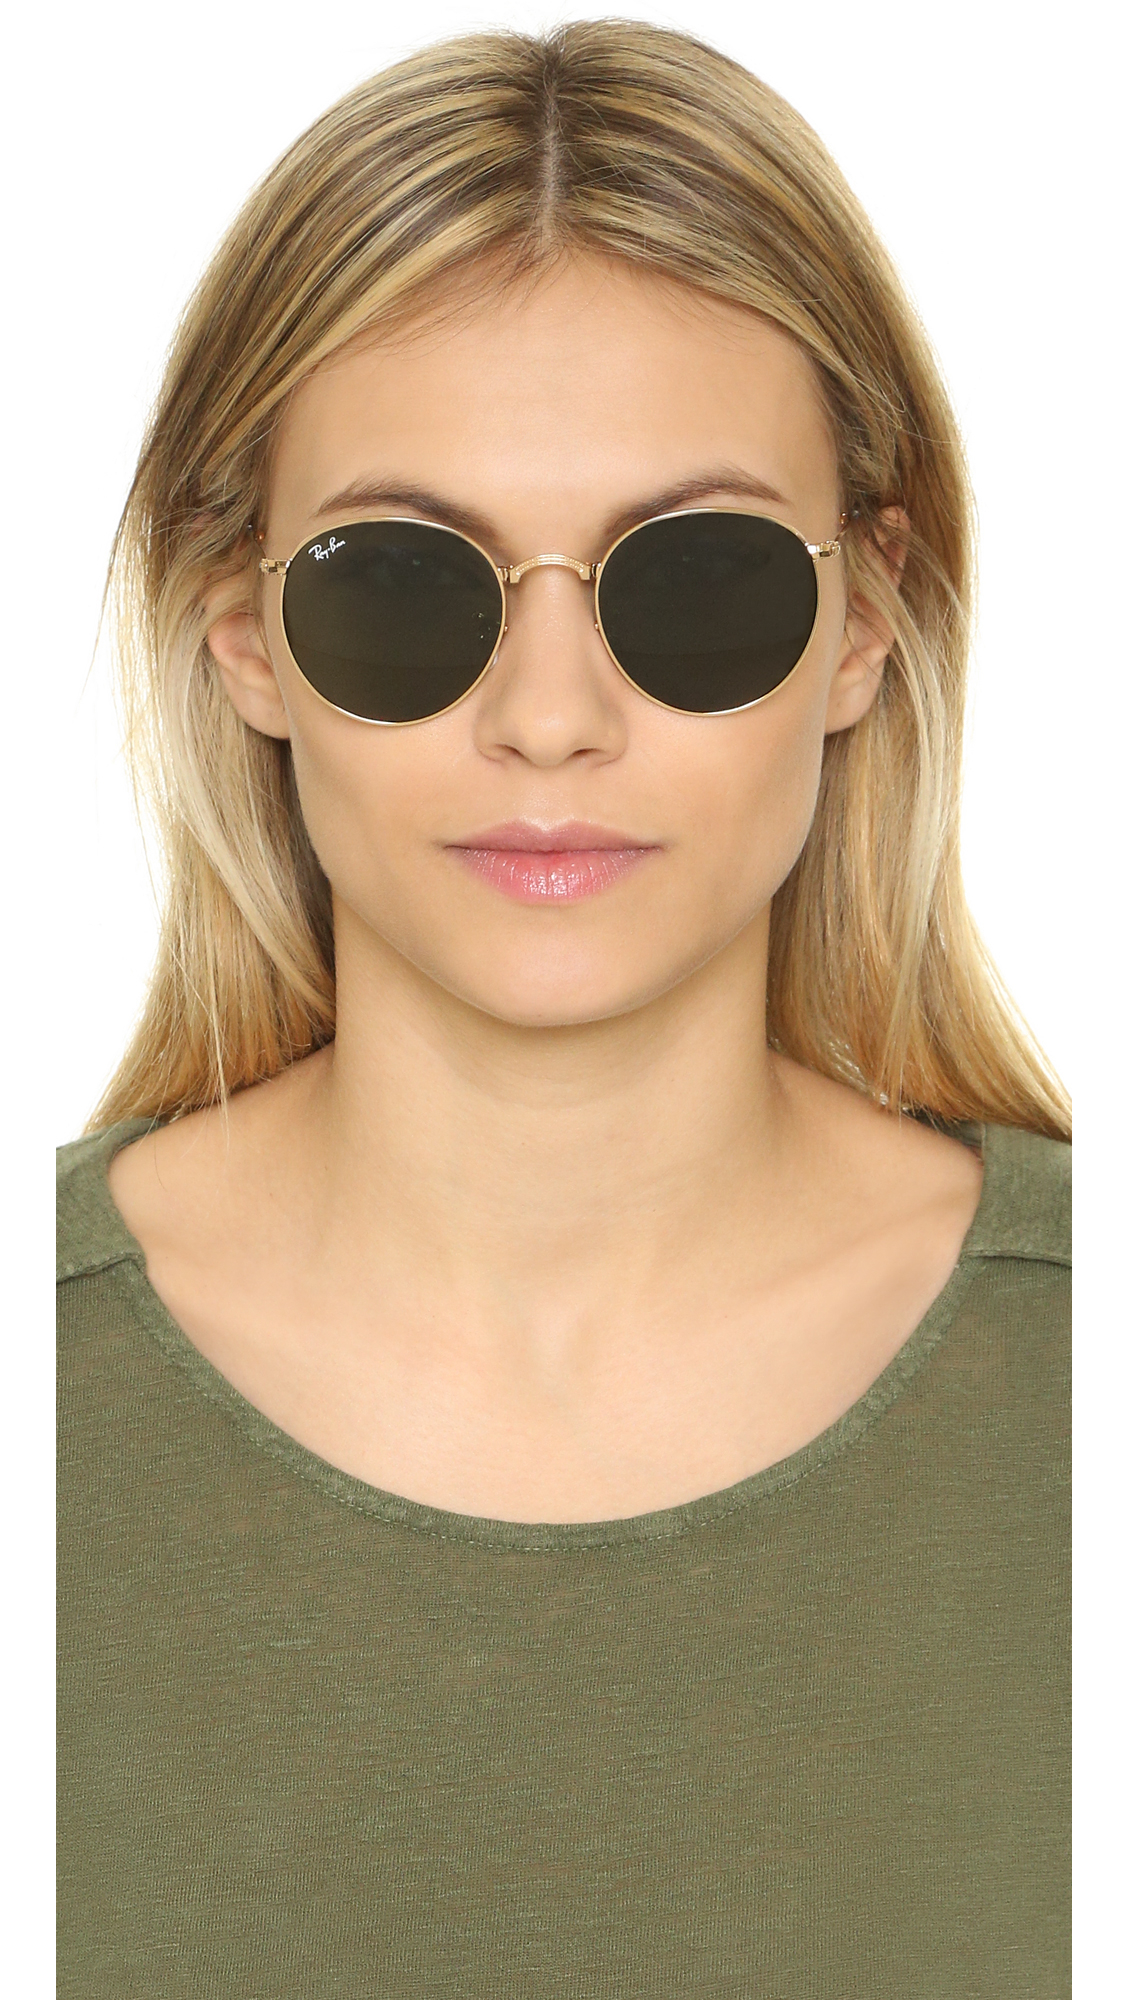 Ray-Ban Rb3532 Icons Round Sunglasses in Gold/Green (Green) - Lyst